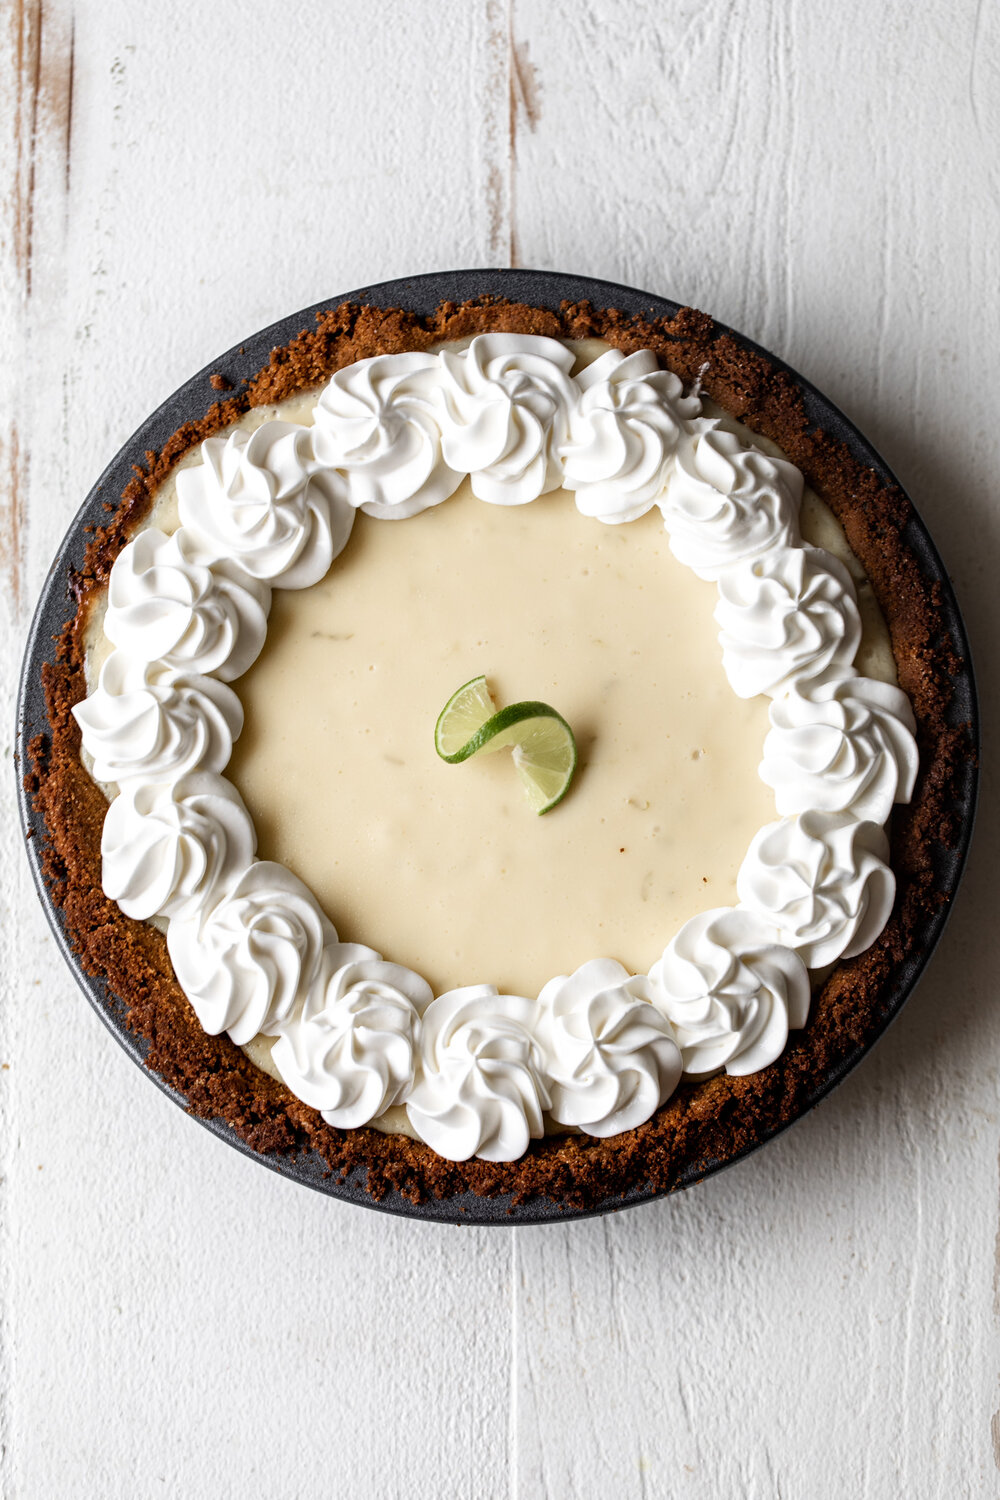 This seasonal summer key lime pie recipe is made with key lime juice and condensed milk topped with sour cream whipped cream for a tasty dessert.